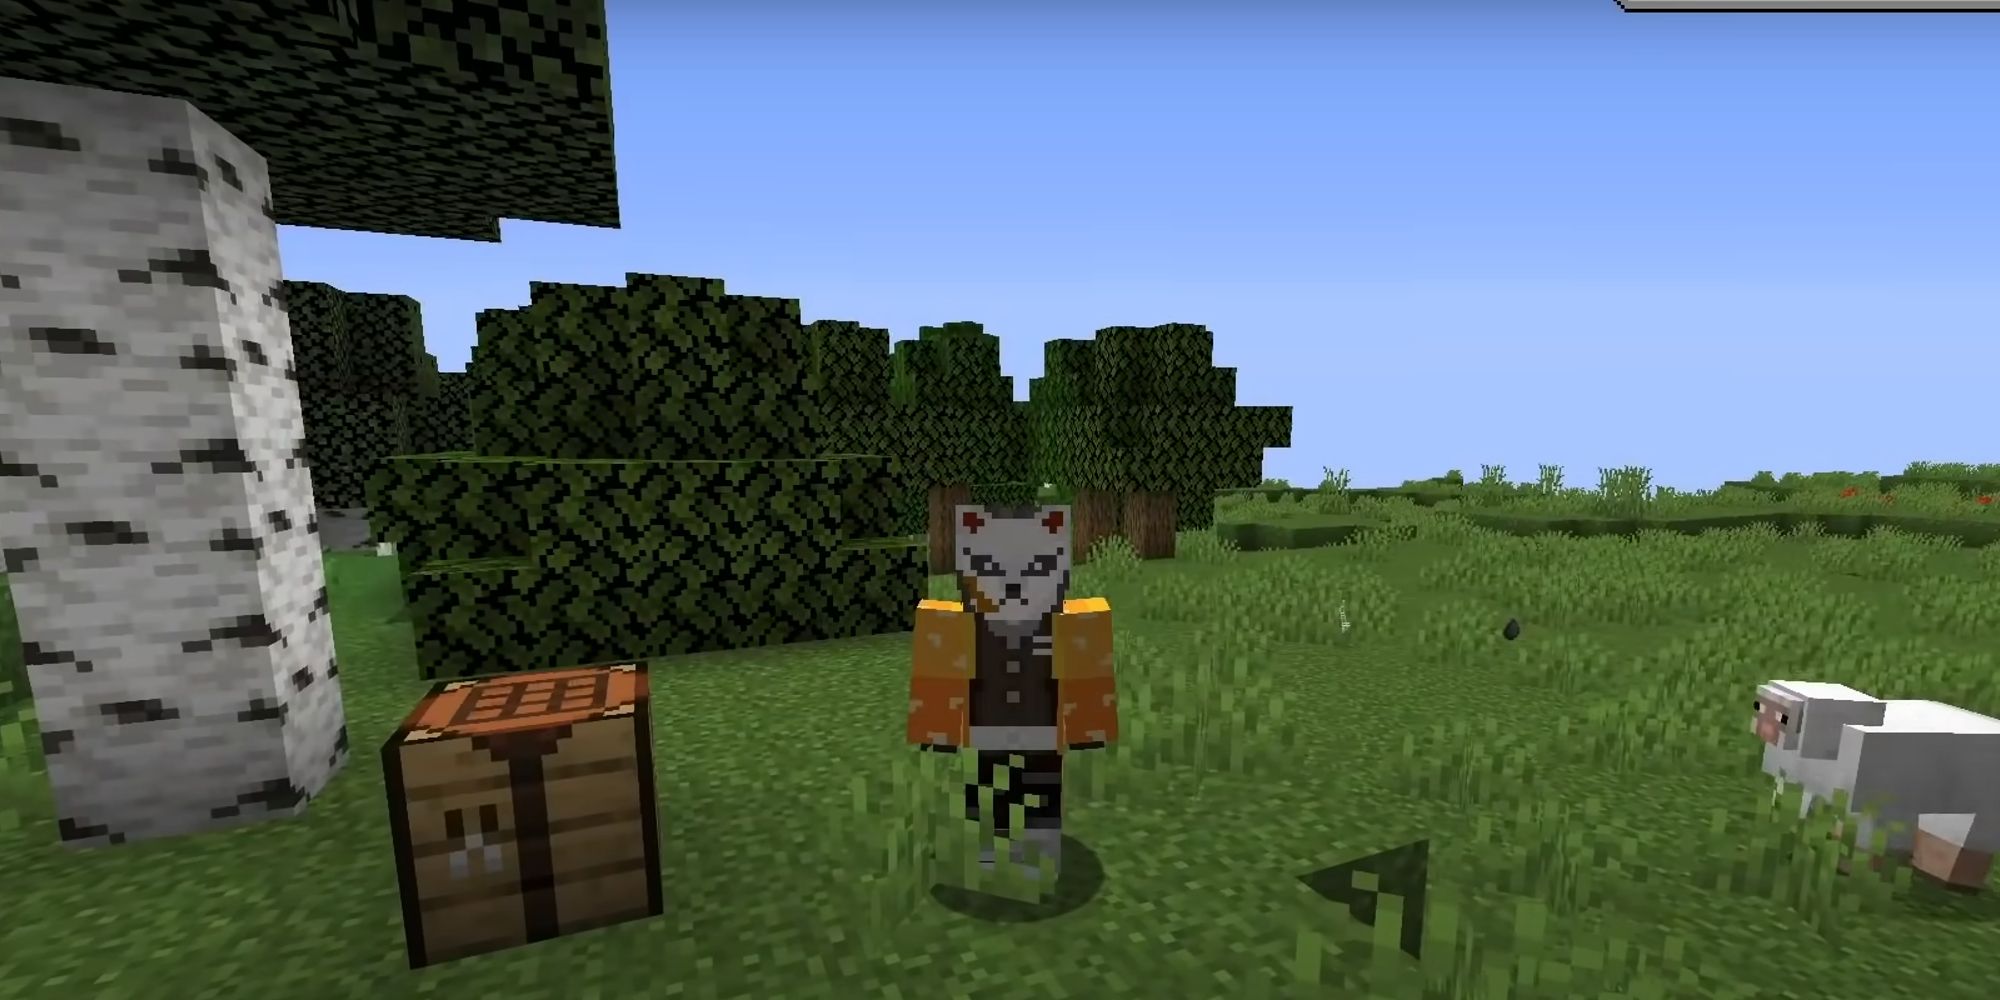 Minecraft Character In Demon Slayer Outfit Standing In Open Field